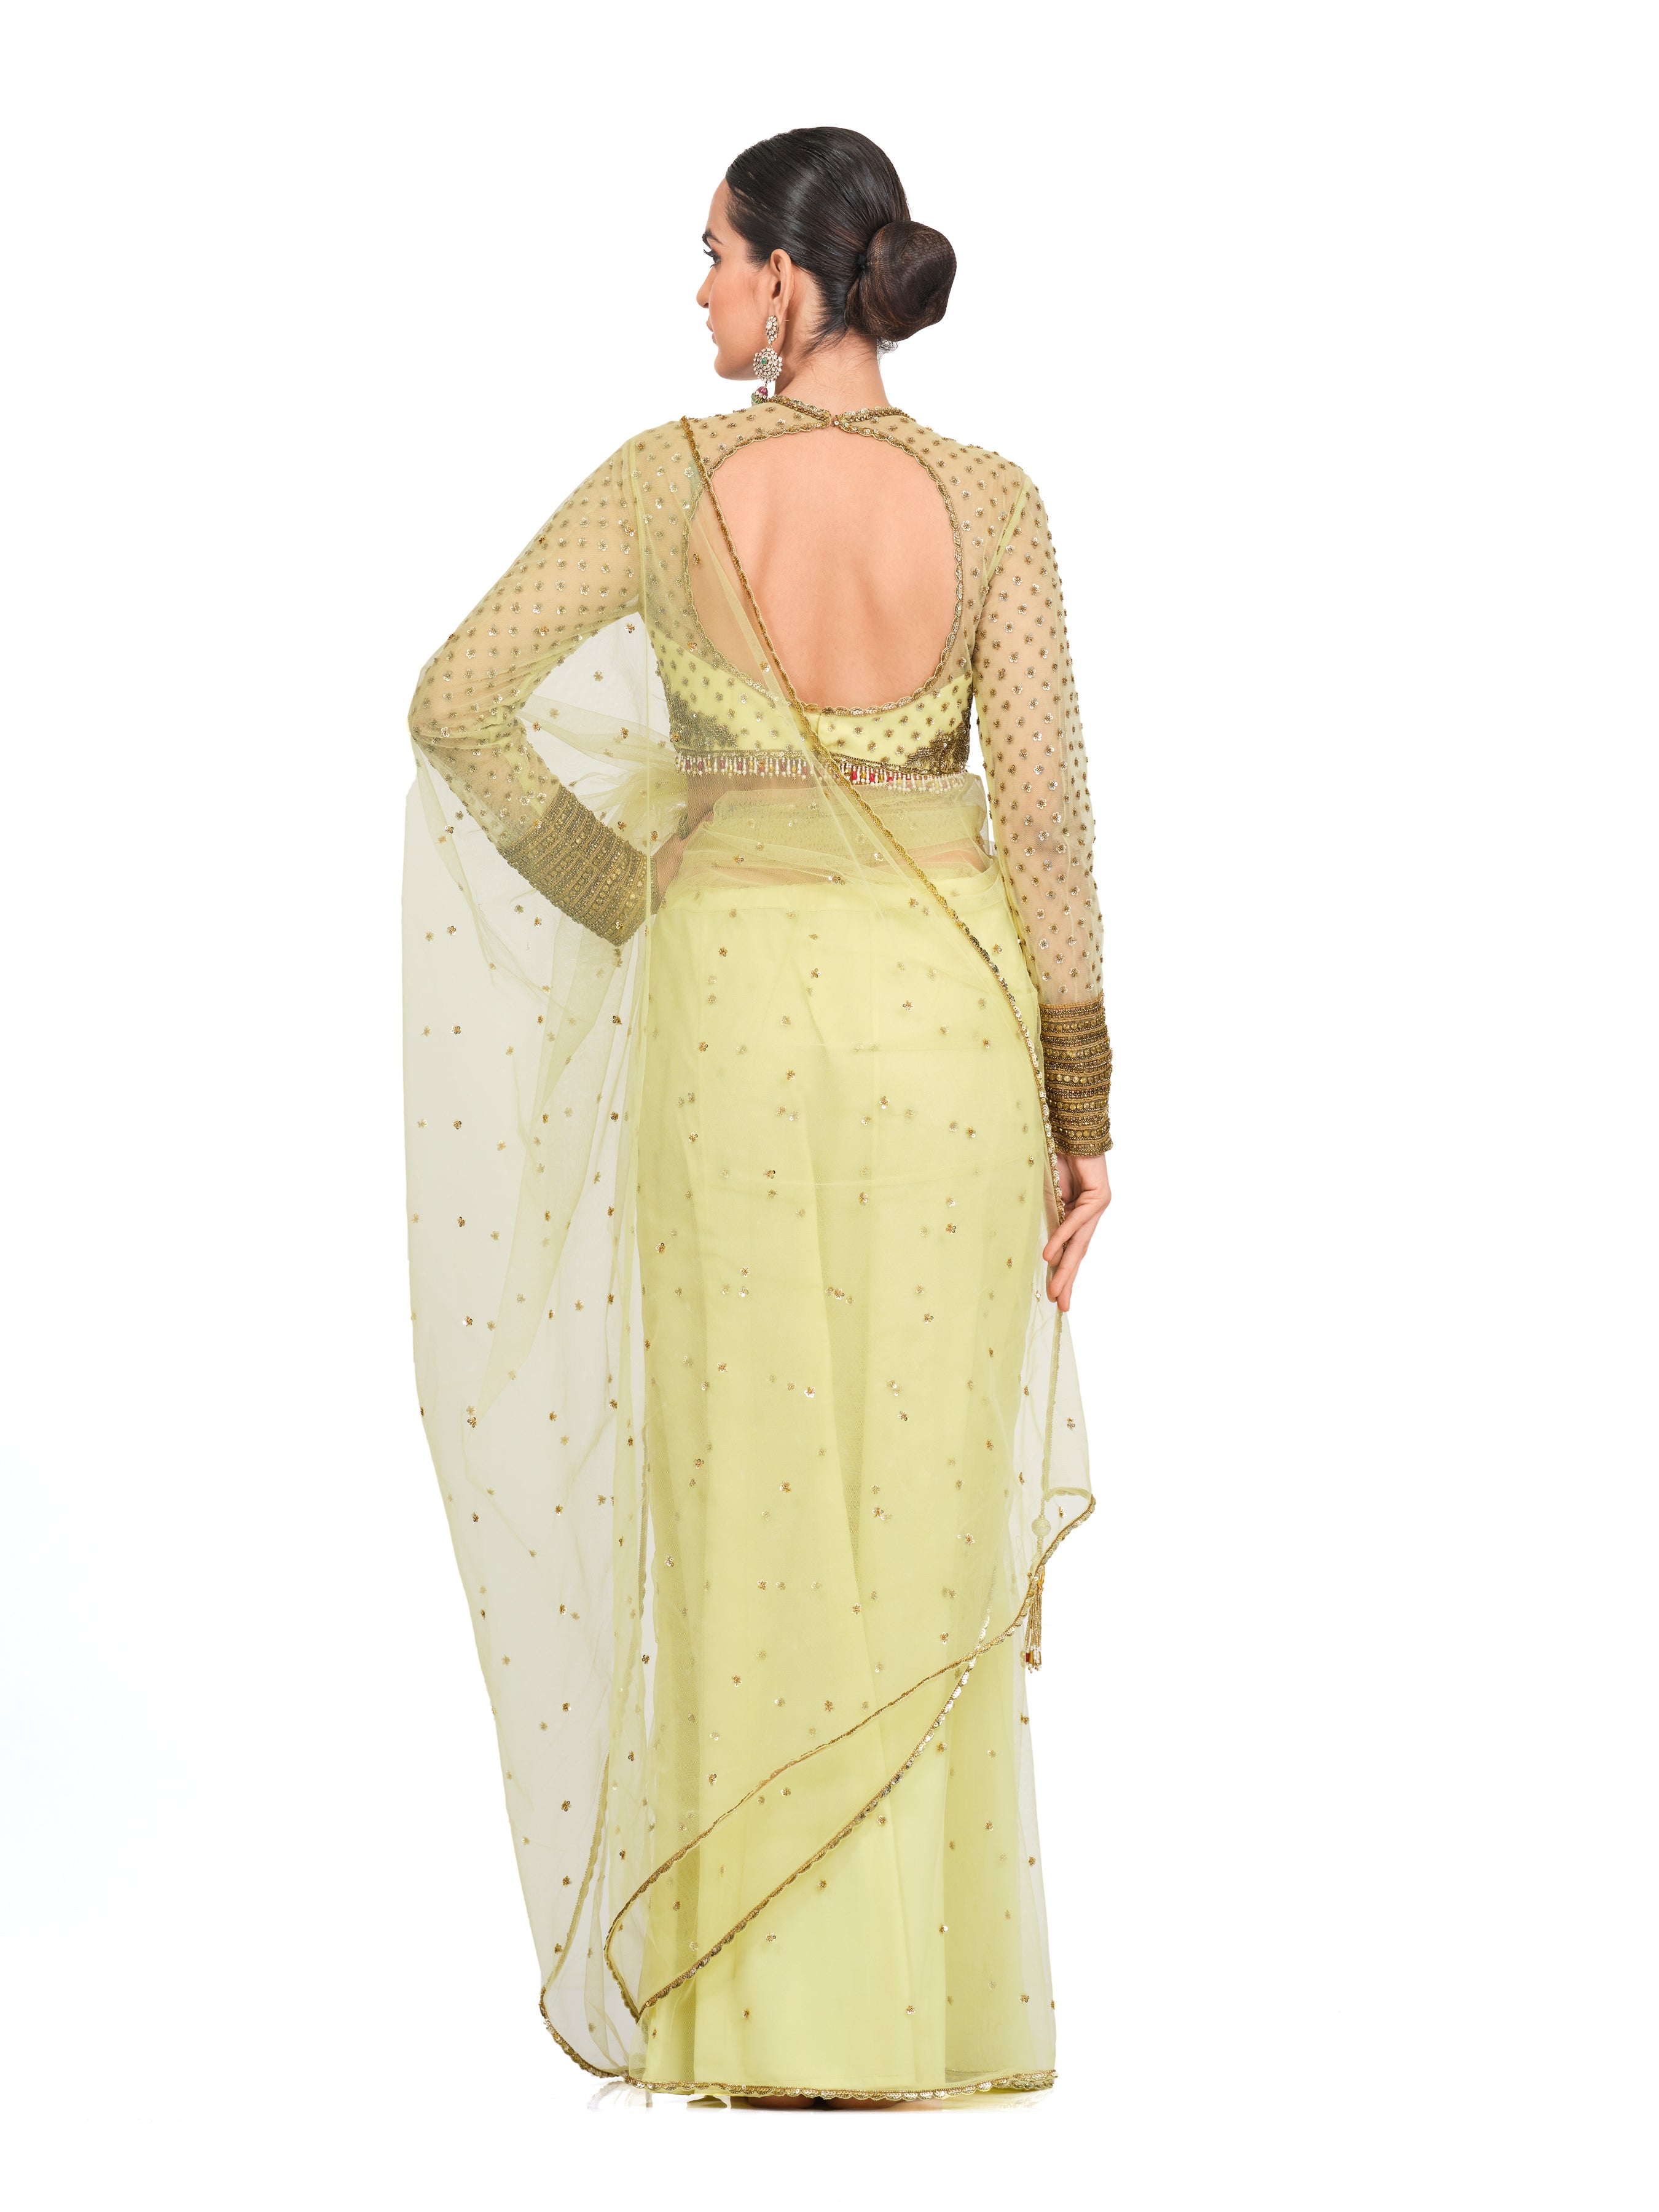 Net Saree With Embroidered Blouse